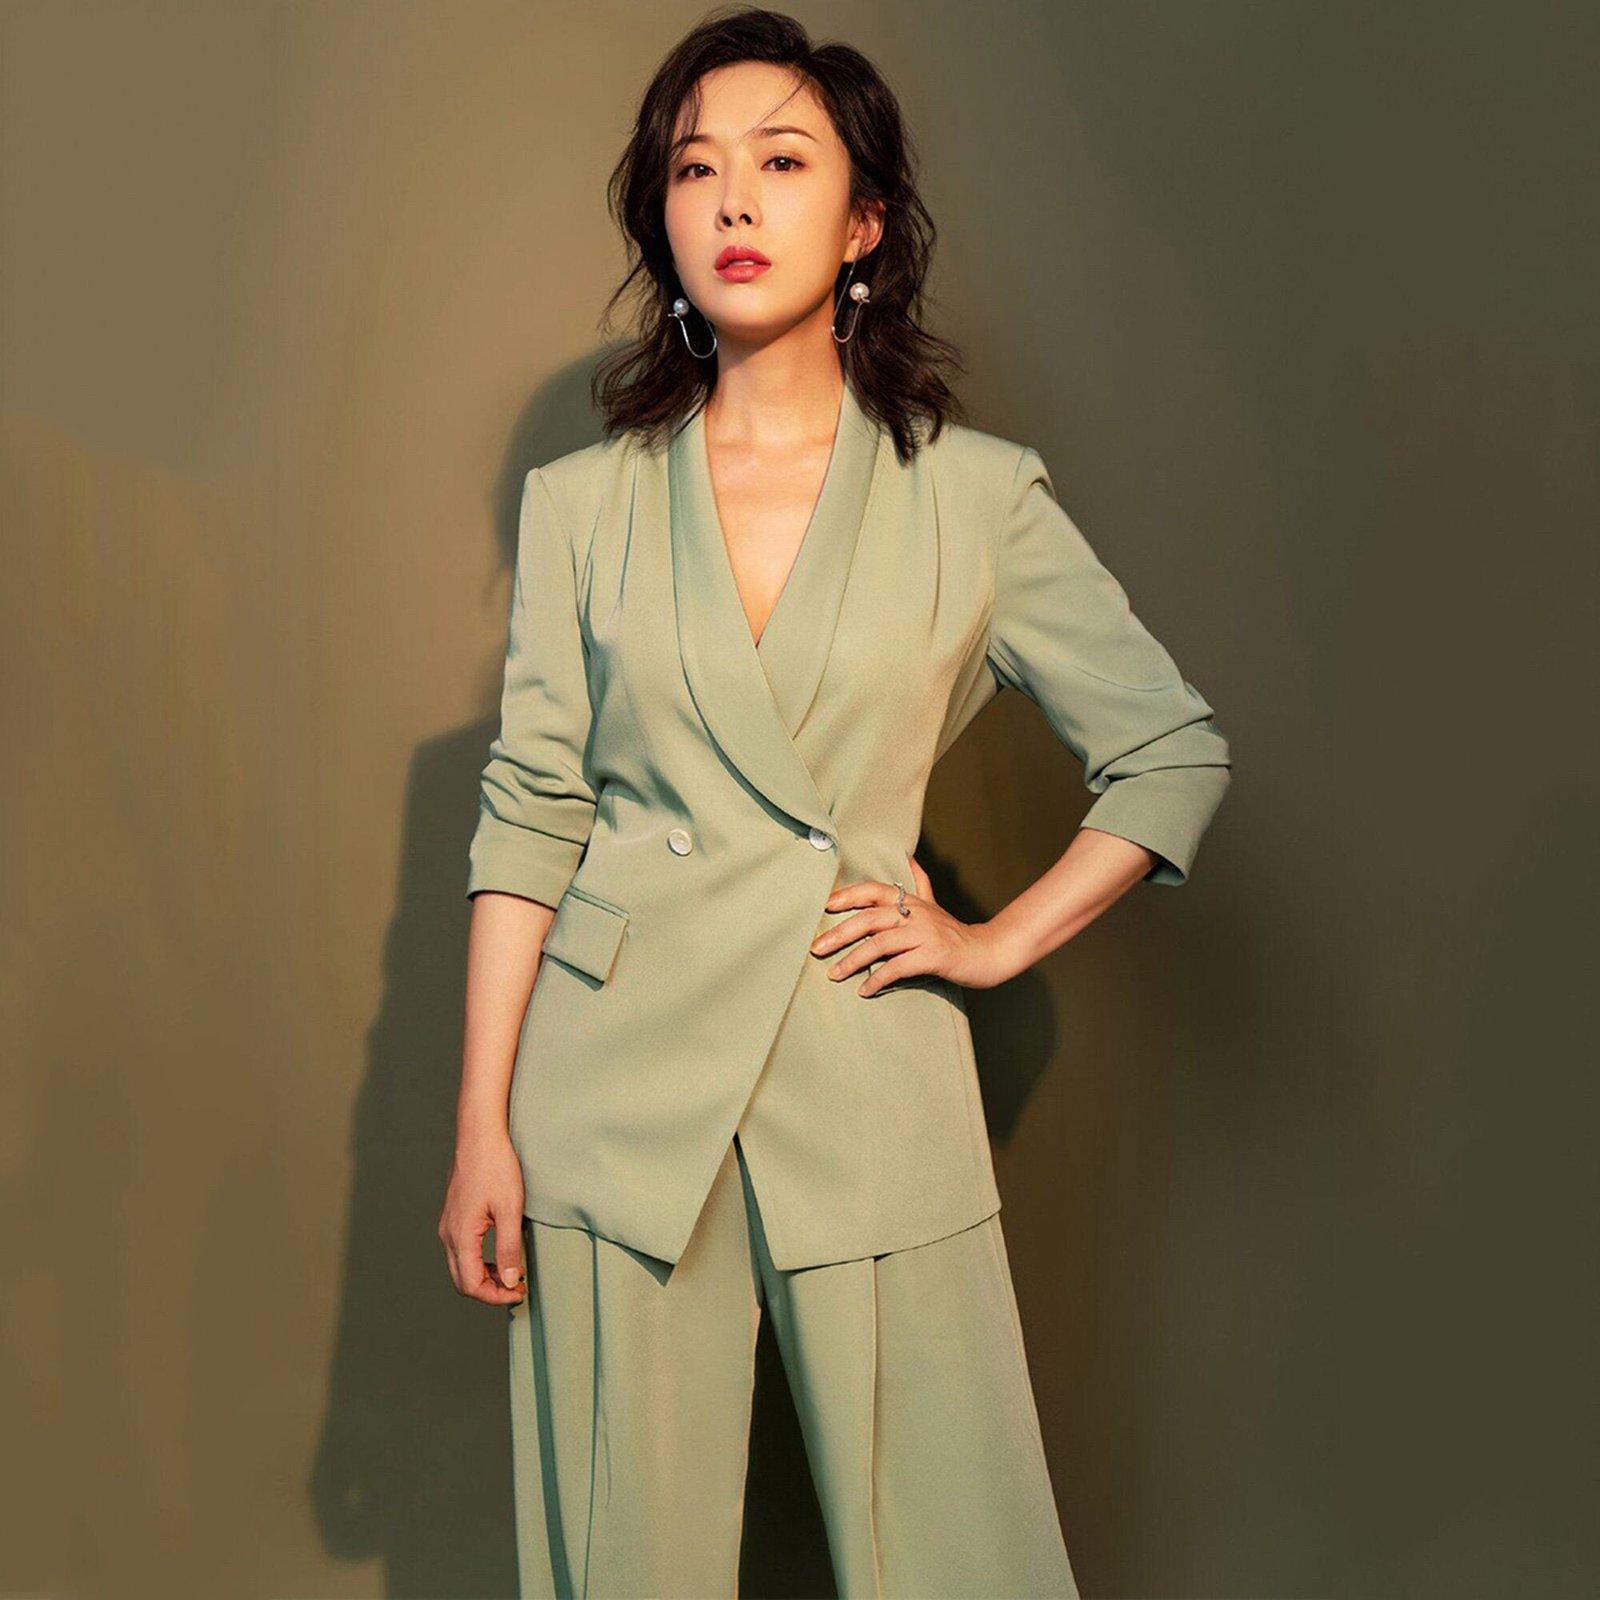 Green Blazer Ladies Women Suit Double Breasted Casual Coat Jacket Pants  Veromia Trouser Suit Formal Wedding Guest Wear From Foreverbridal, $73.72